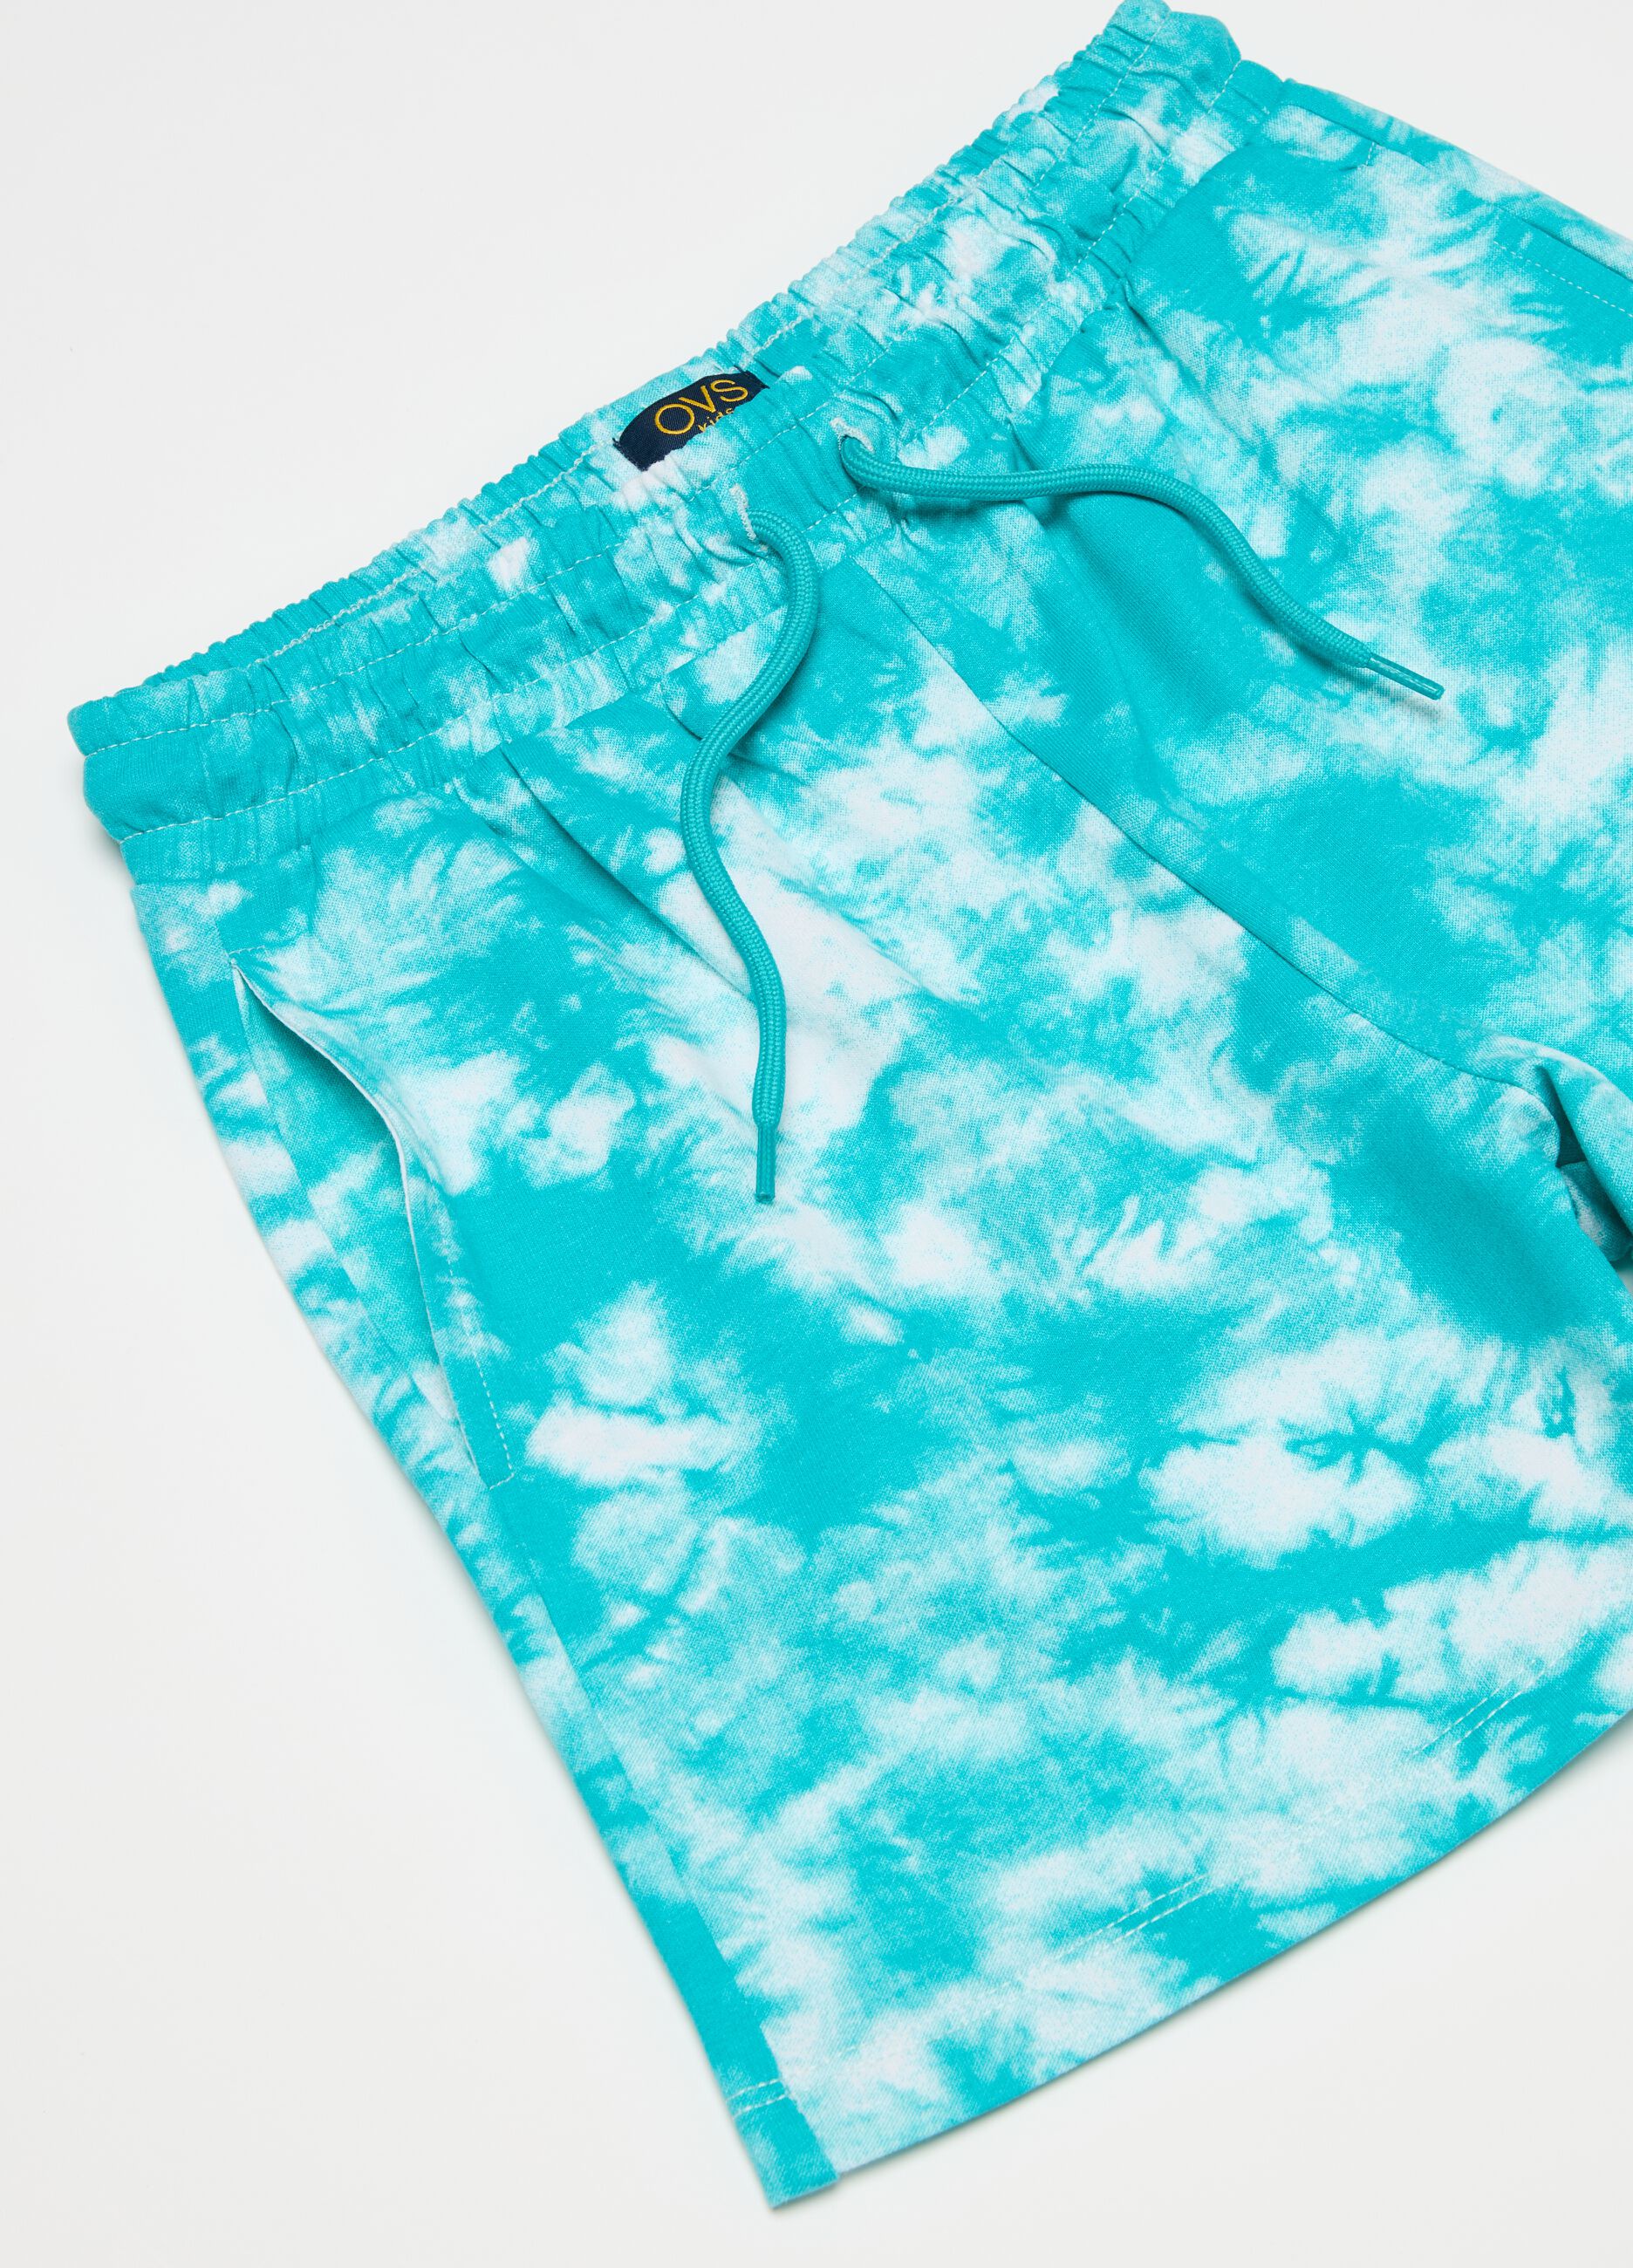 Tie dye shorts in French terry